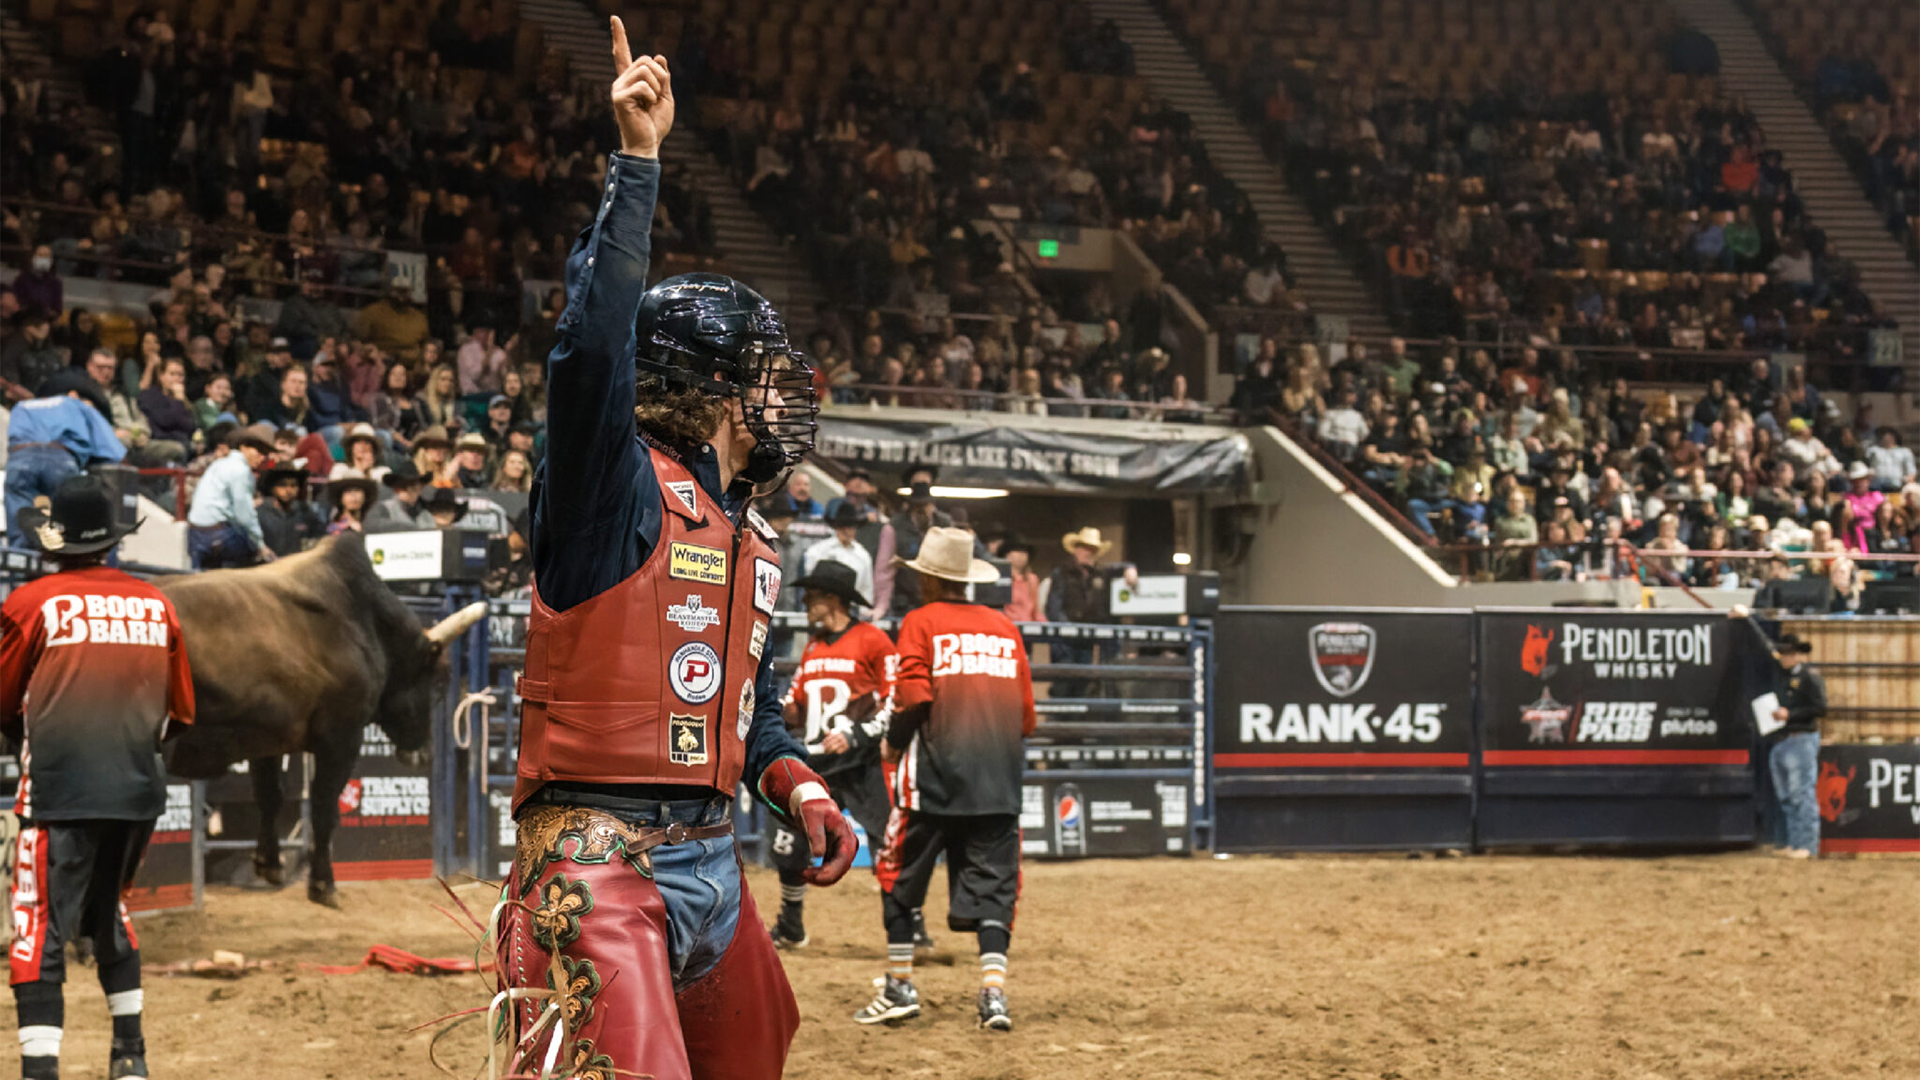 PBR rider showcasing their skills in the arena during the current year